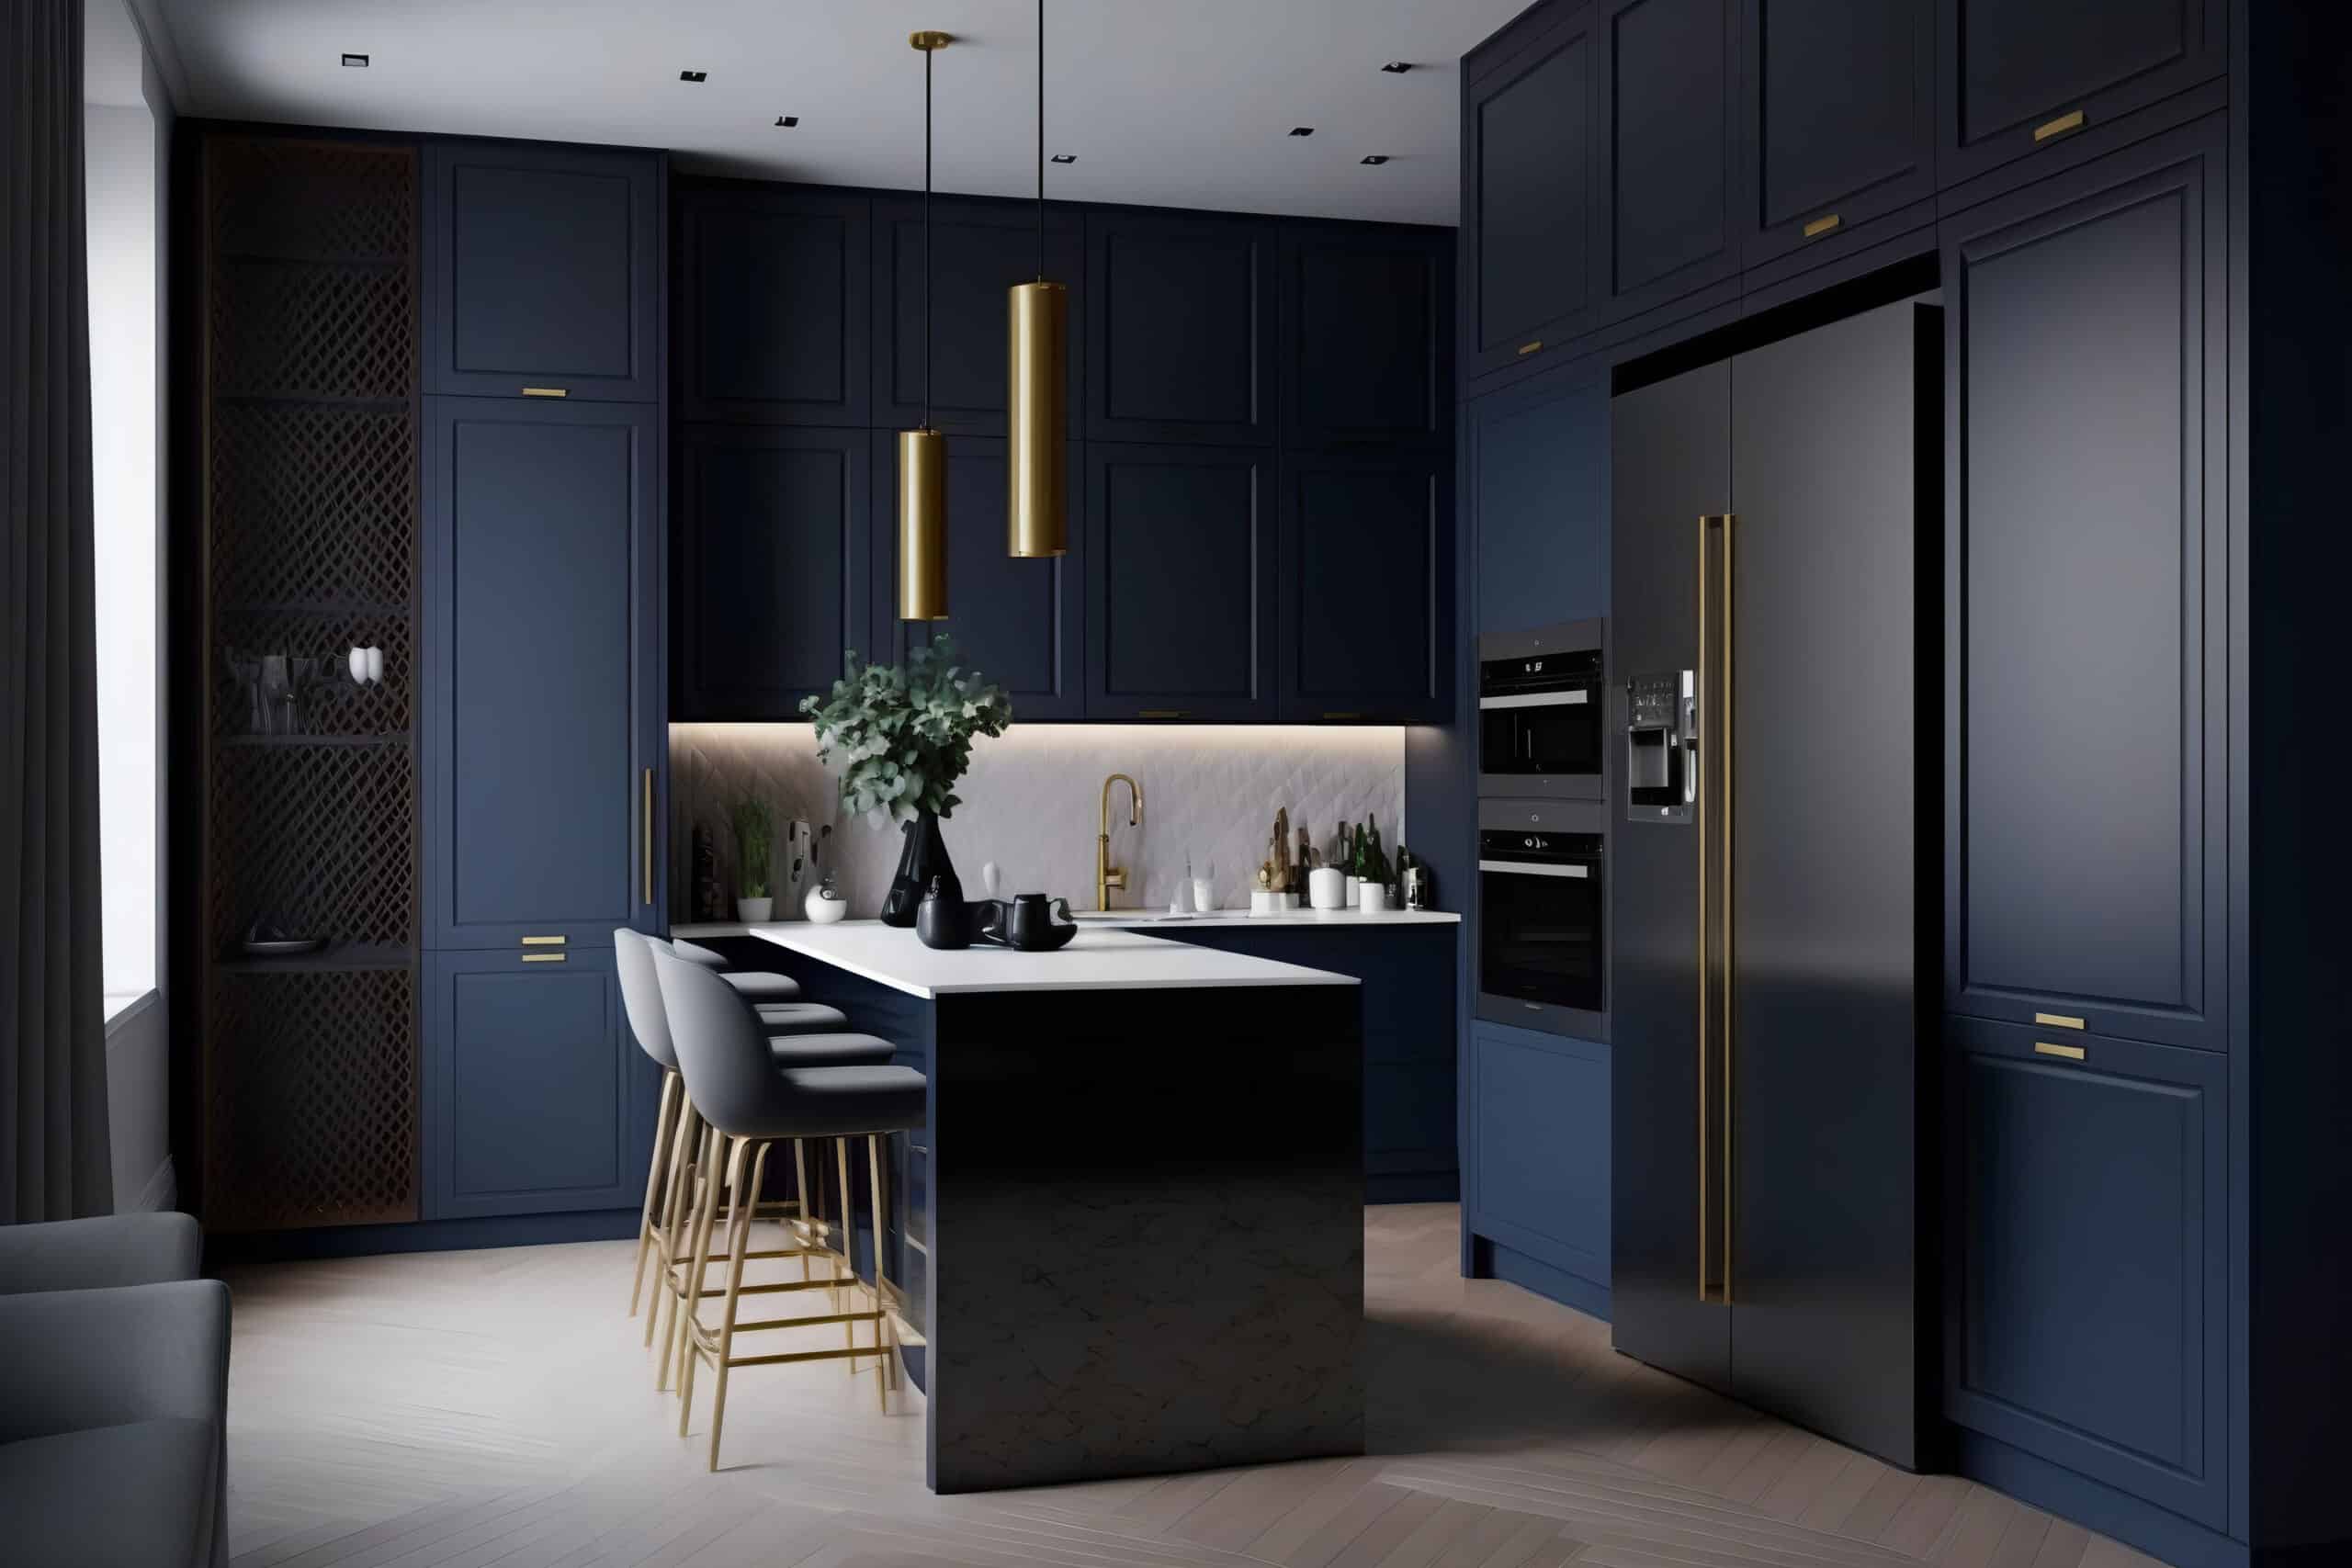 a modern kitchen with a sleek and sophisticated design. The dark